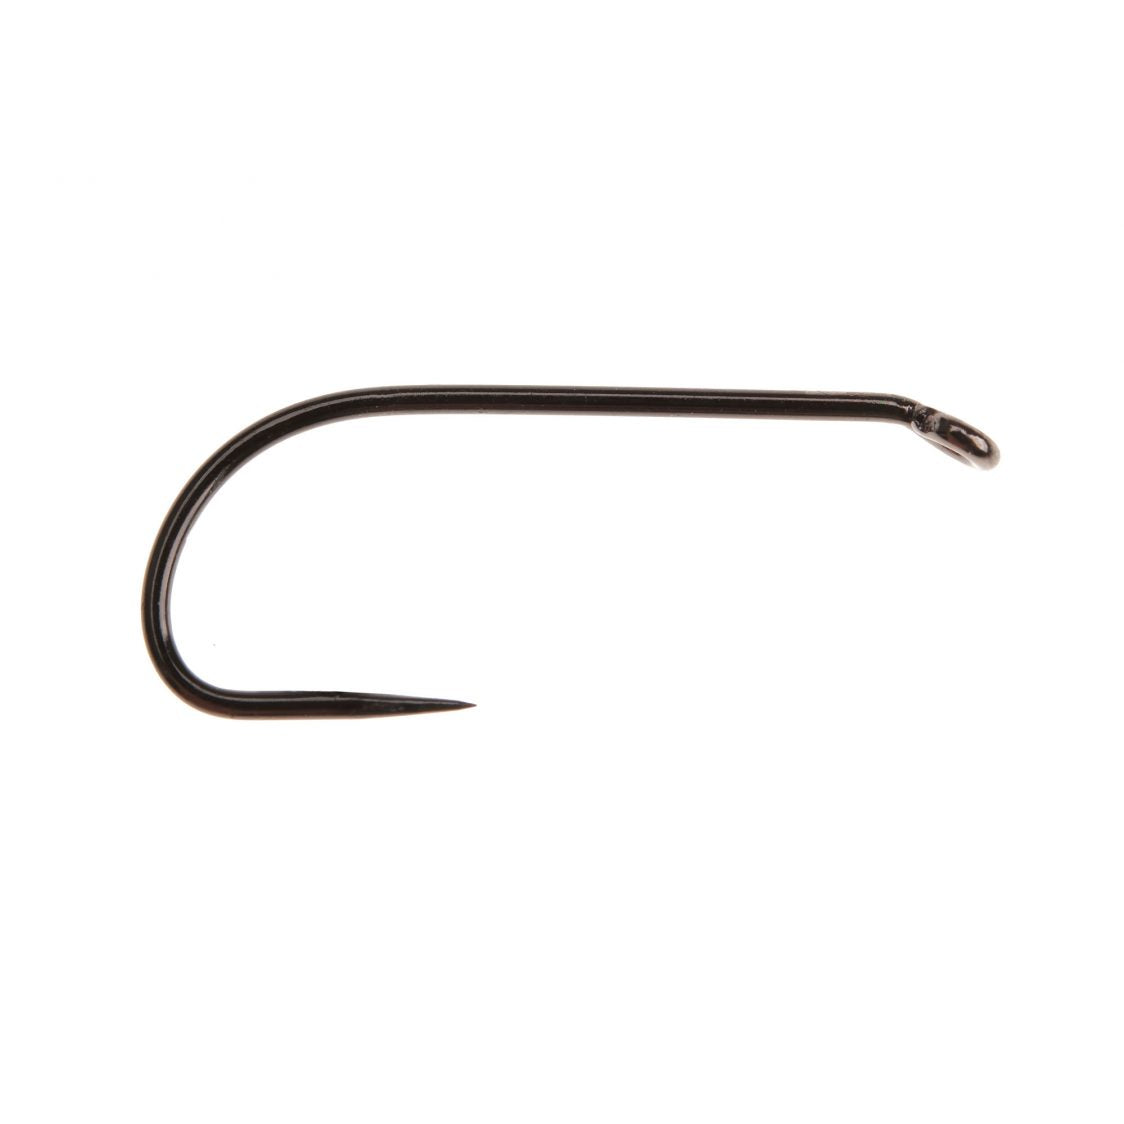 FW581 - Wet Fly Hook, Barbless